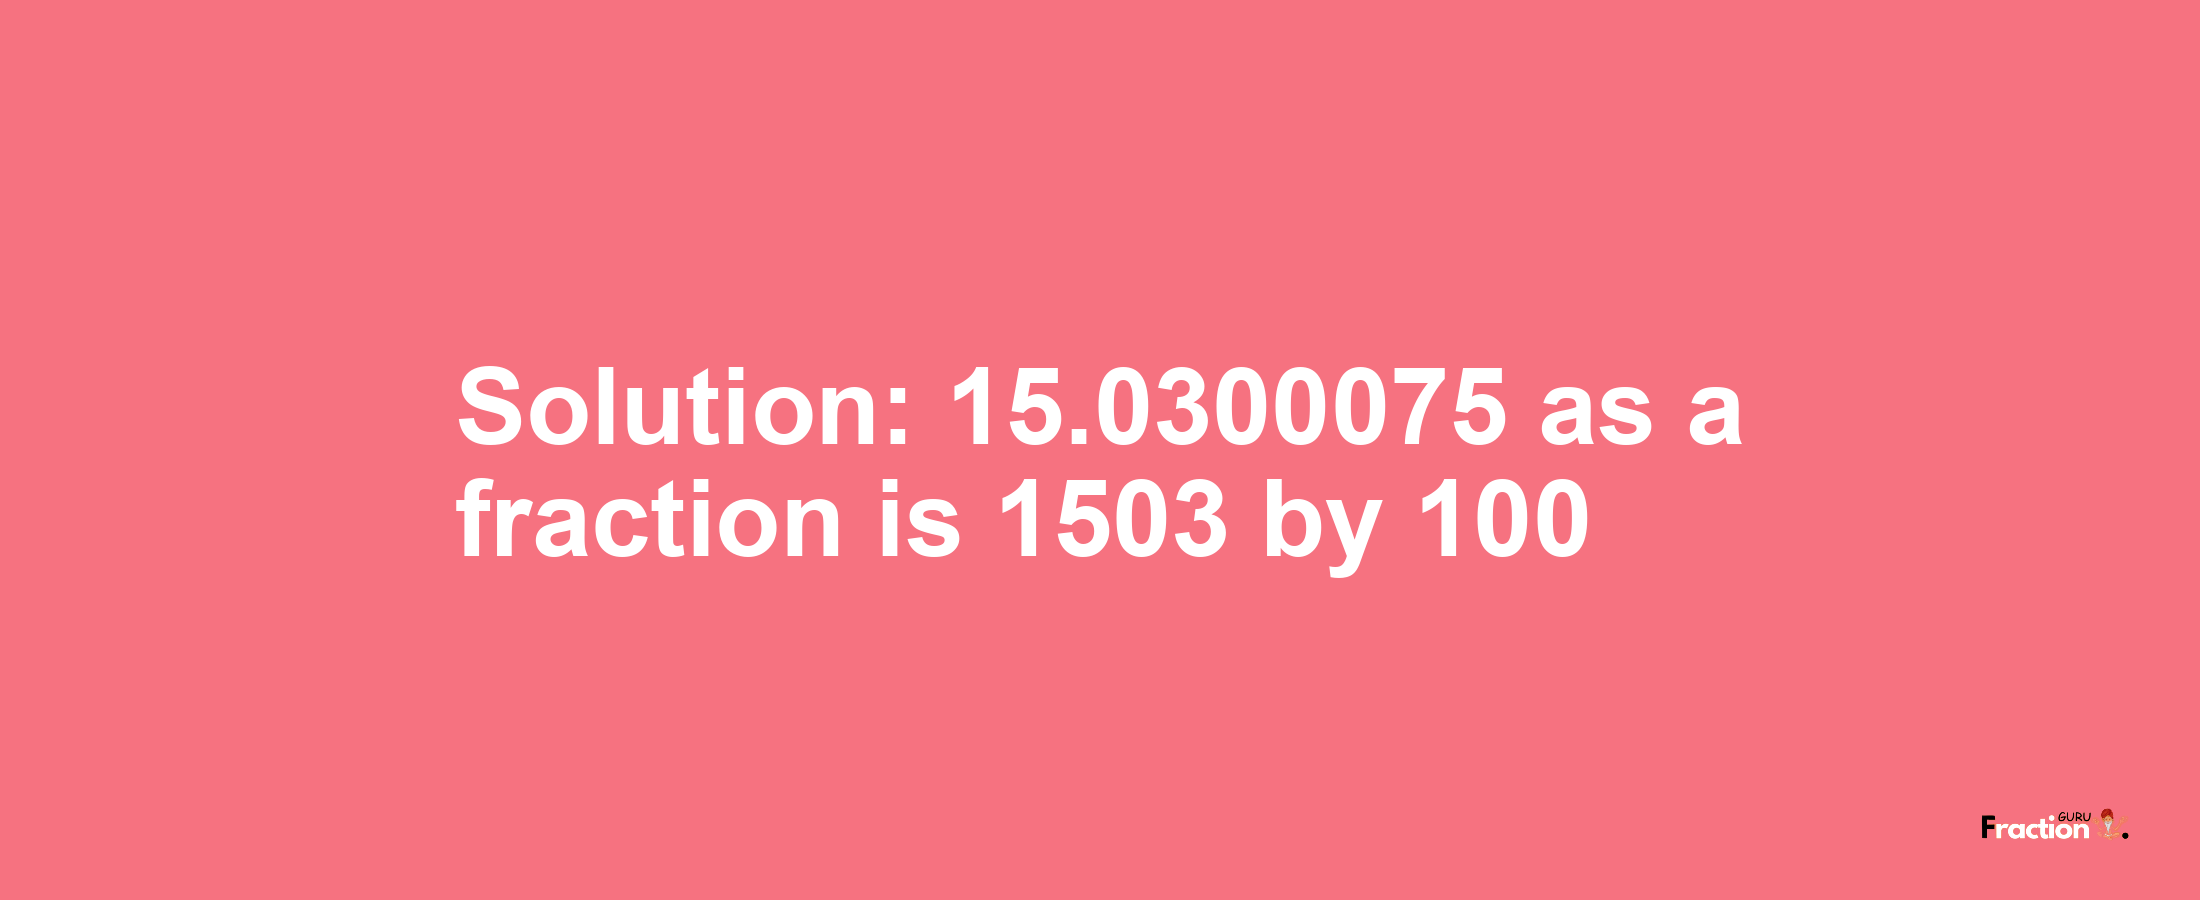 Solution:15.0300075 as a fraction is 1503/100